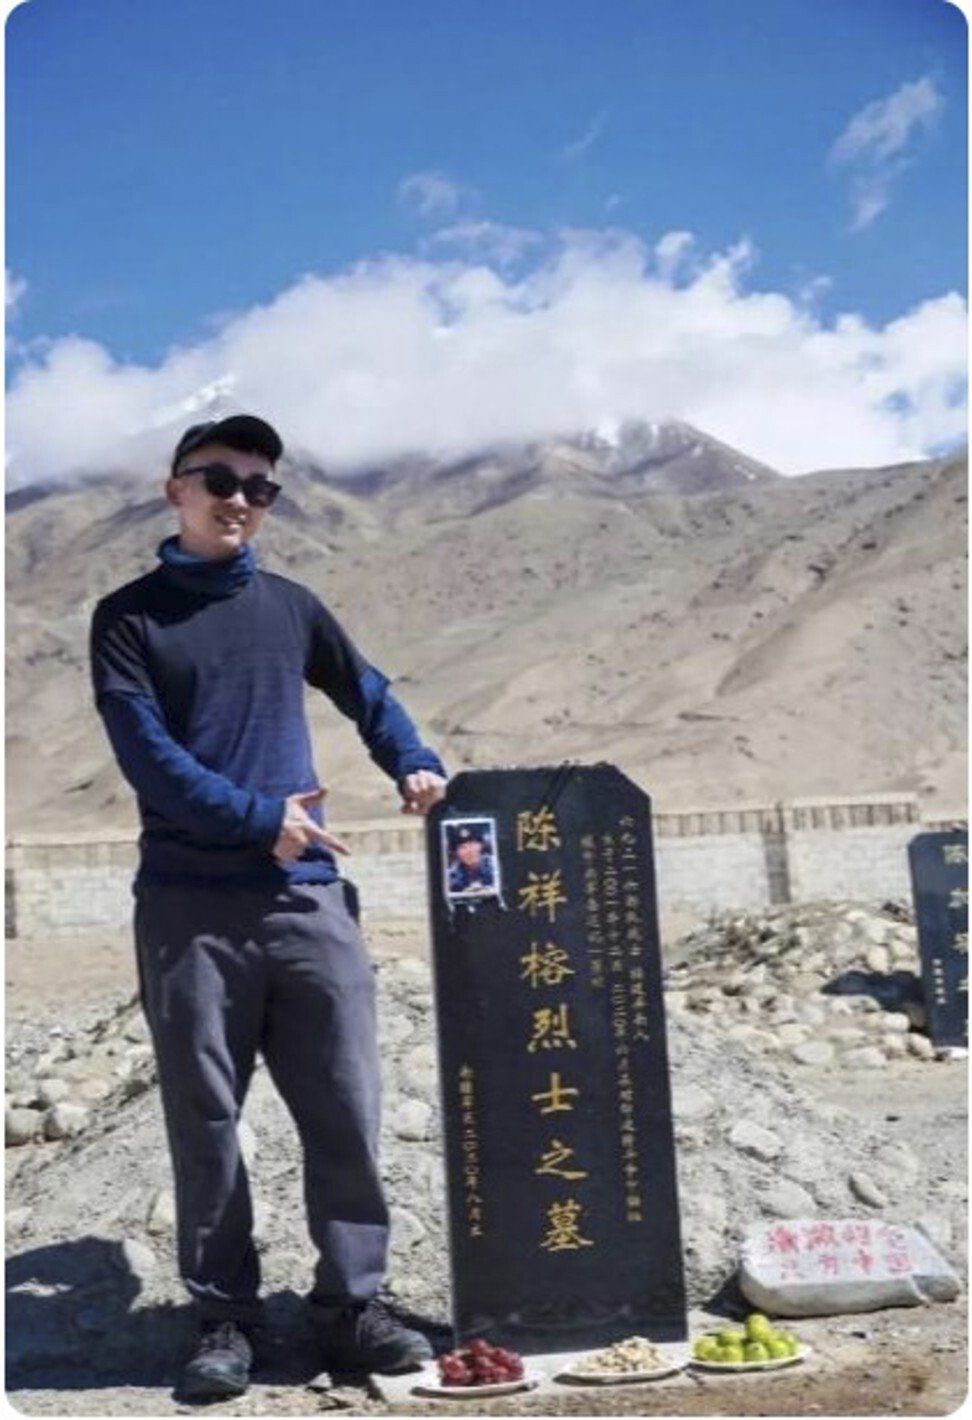 Blogger Xiao Xian holds his hand in the shape of what many believed looks like a gun pointing at a soldier’s grave. Photo: Xiao Xian Jayson